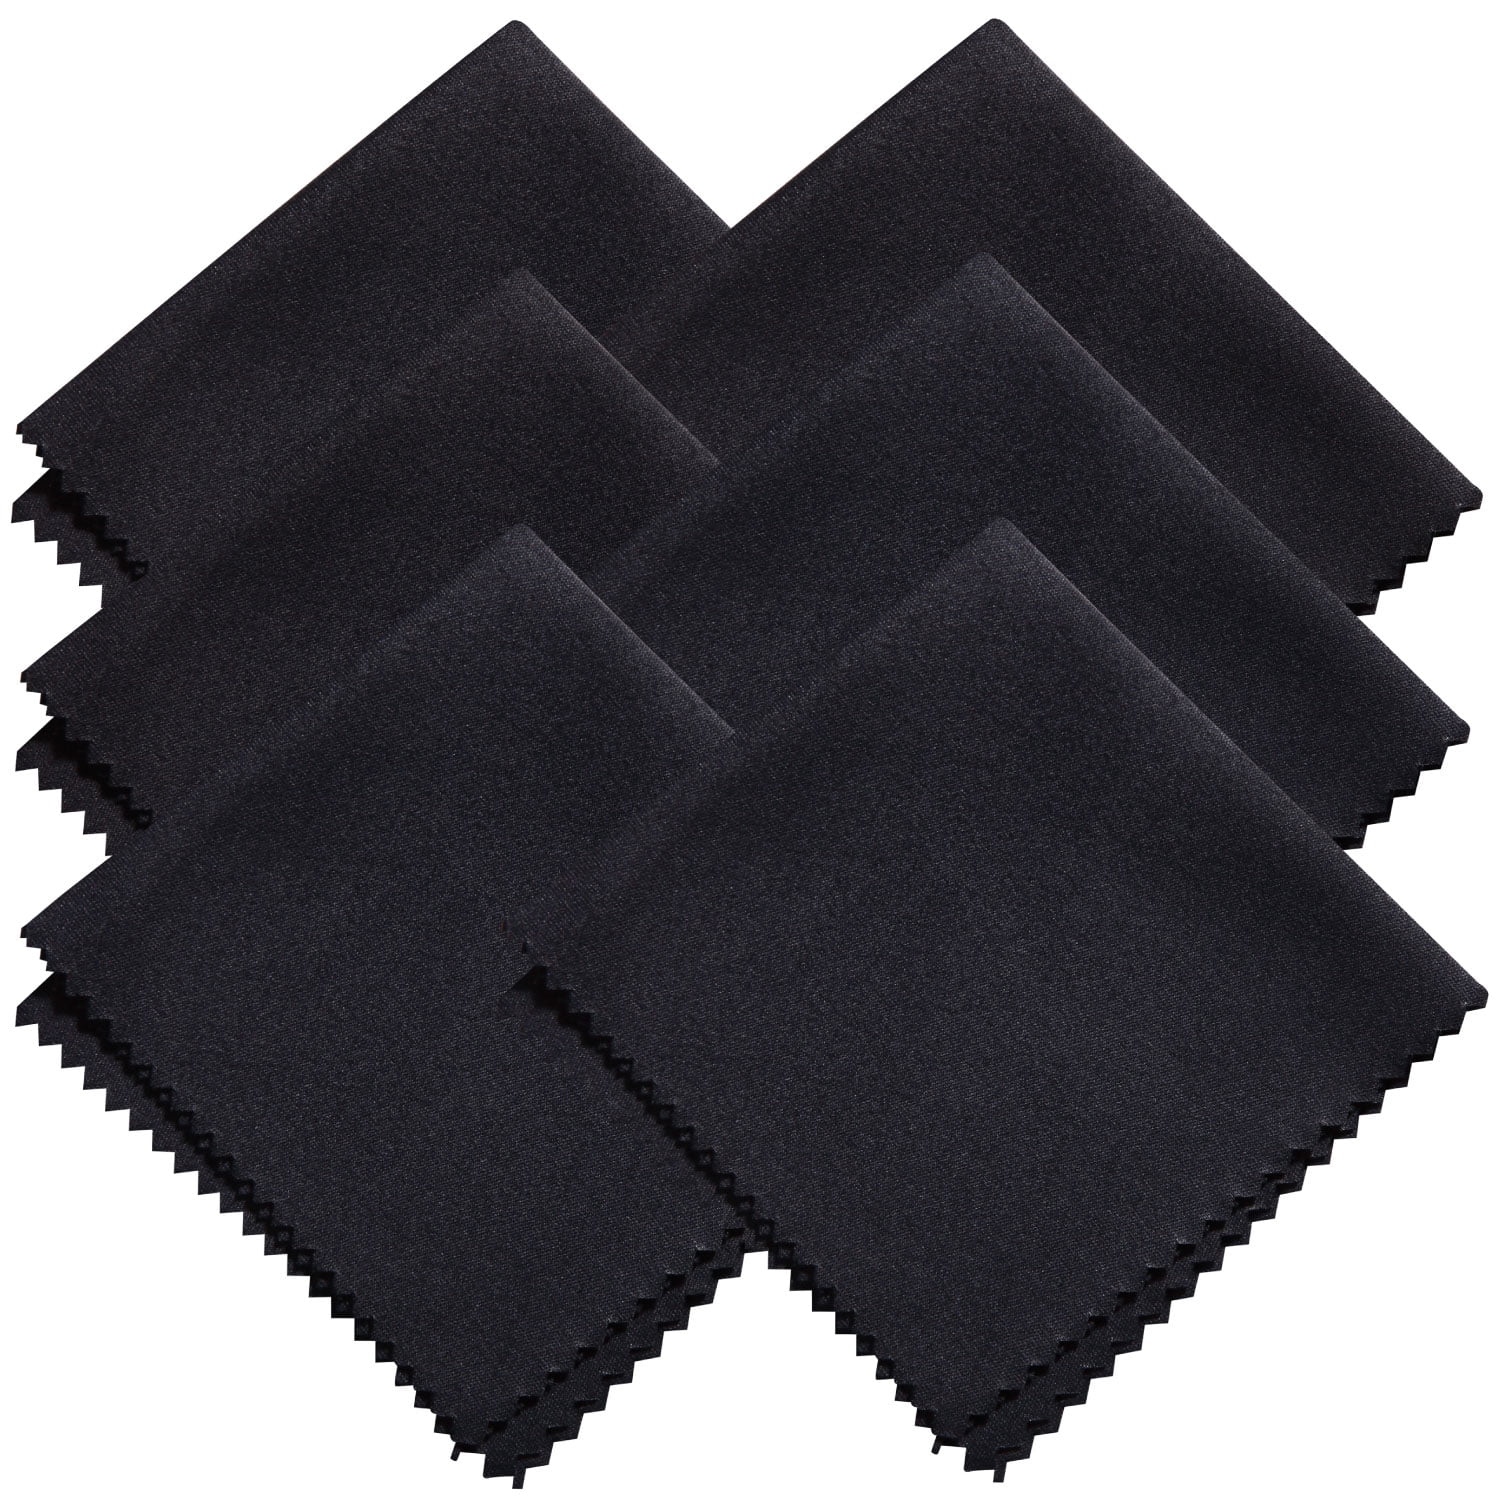 10 x Premium Microfiber Cleaning Cloths for Lens Glasses Screen Multifunction 